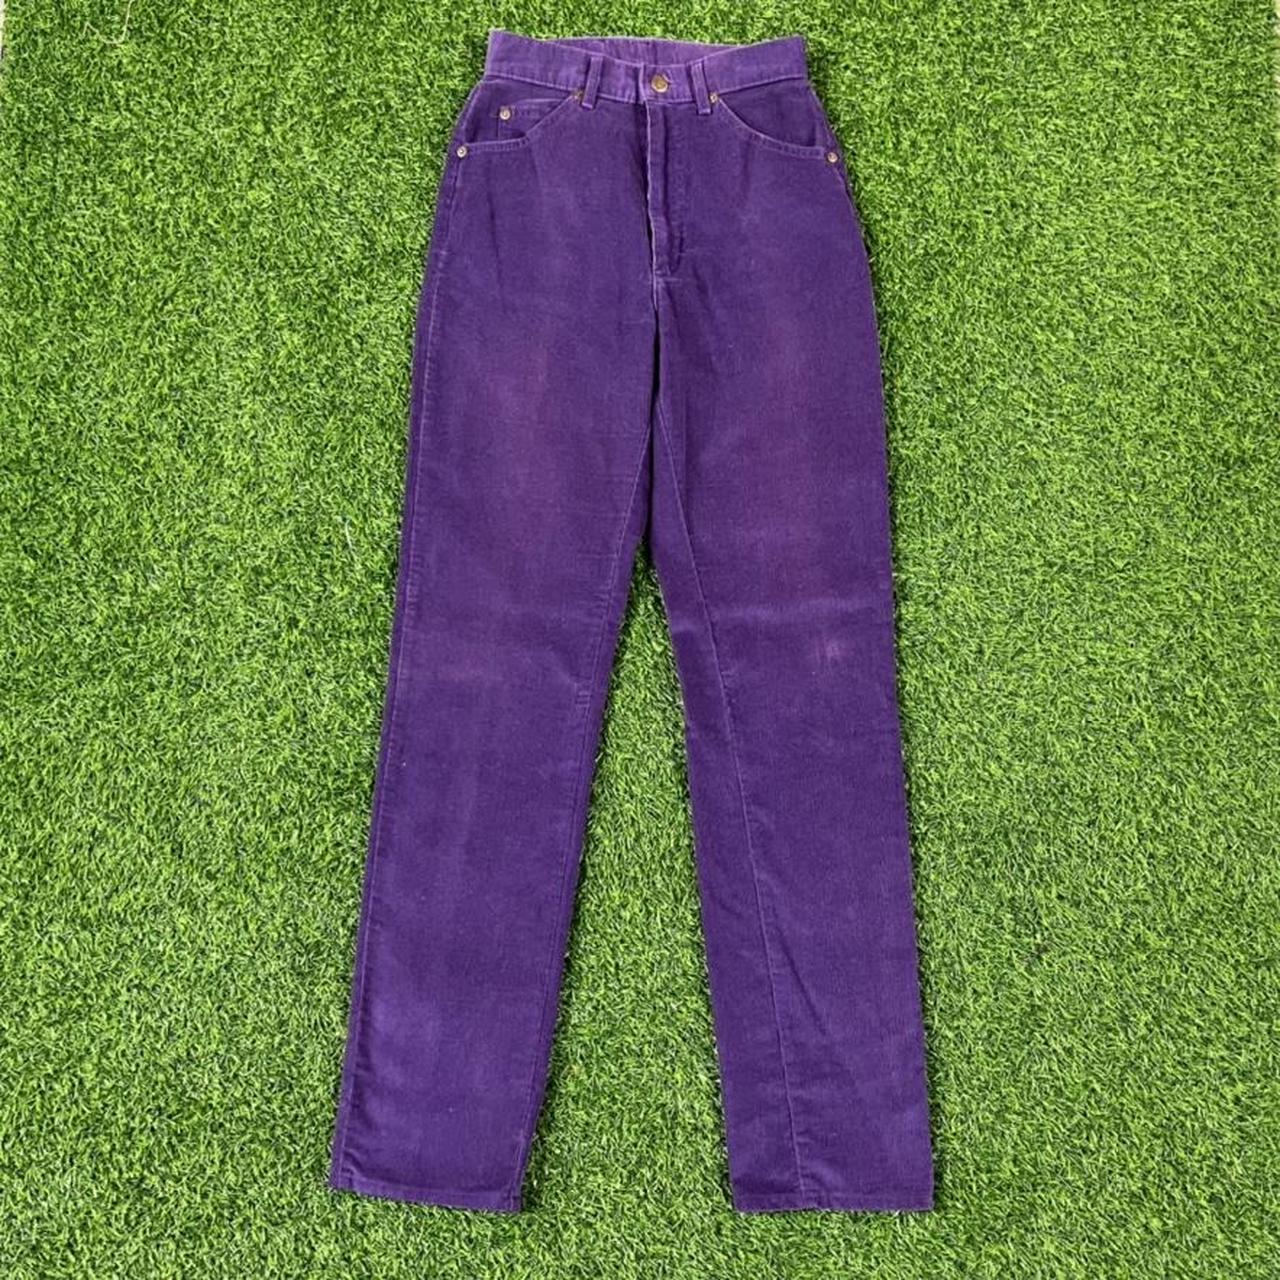 Vintage 90s purple corduroy high waisted jeans by... - Depop